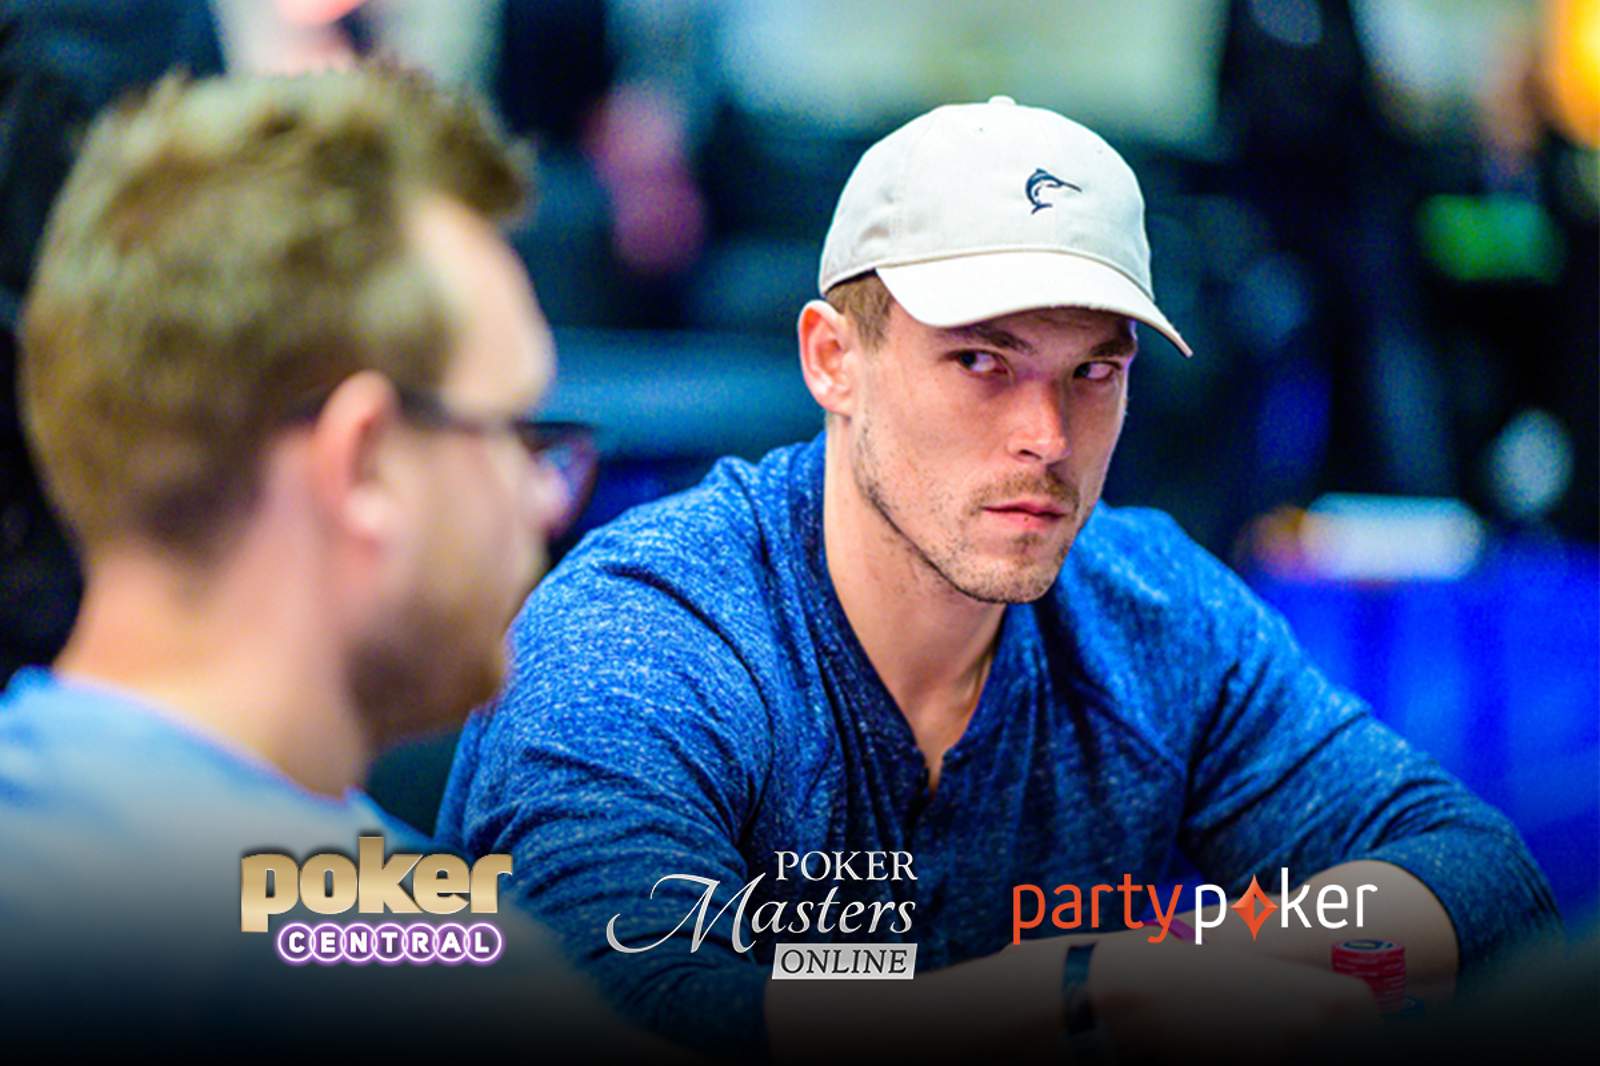 Alex Foxen Scores Big on Day 1 of Poker Masters Online on partypoker